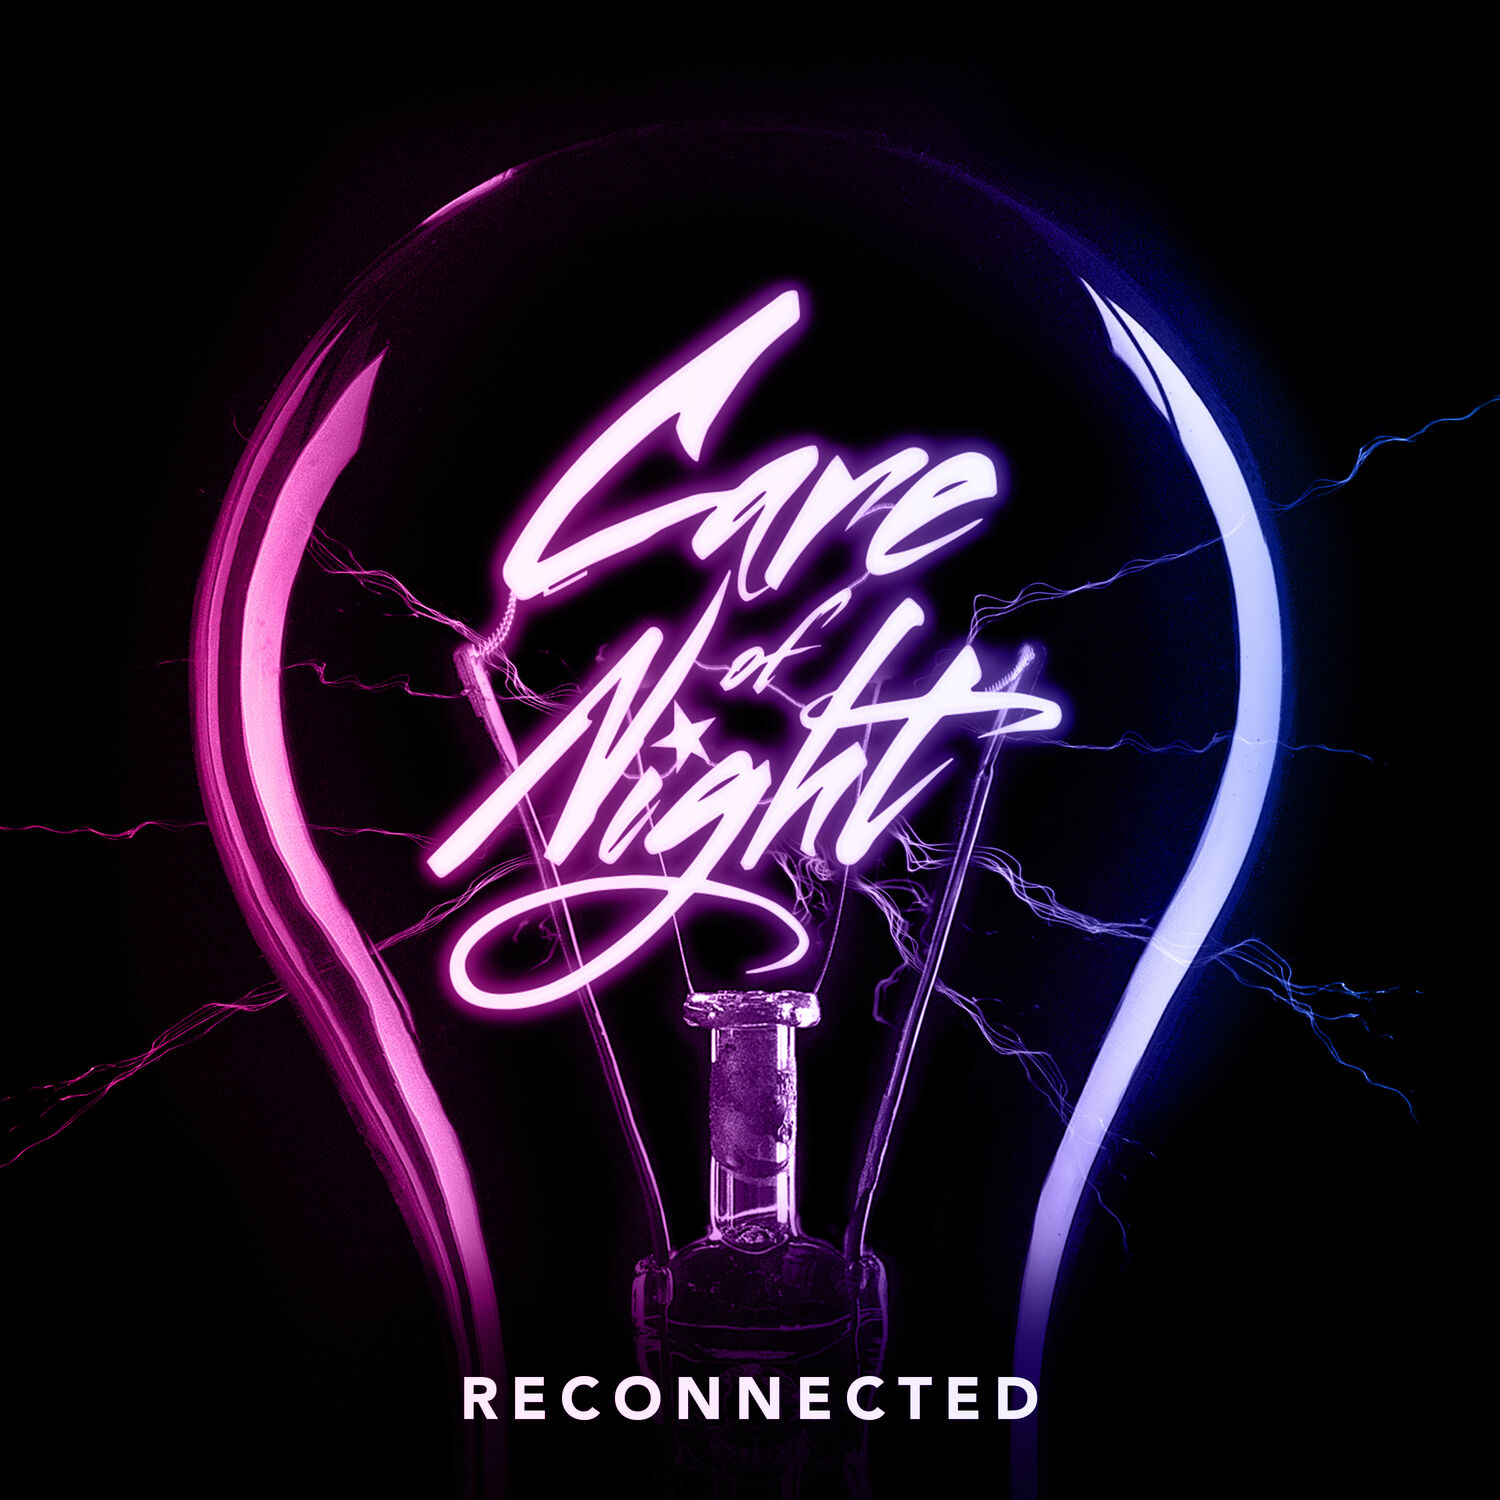 Care Of Night - Reconnected (2023) [24Bit-44.1kHz] FLAC [PMEDIA] ⭐️ Download